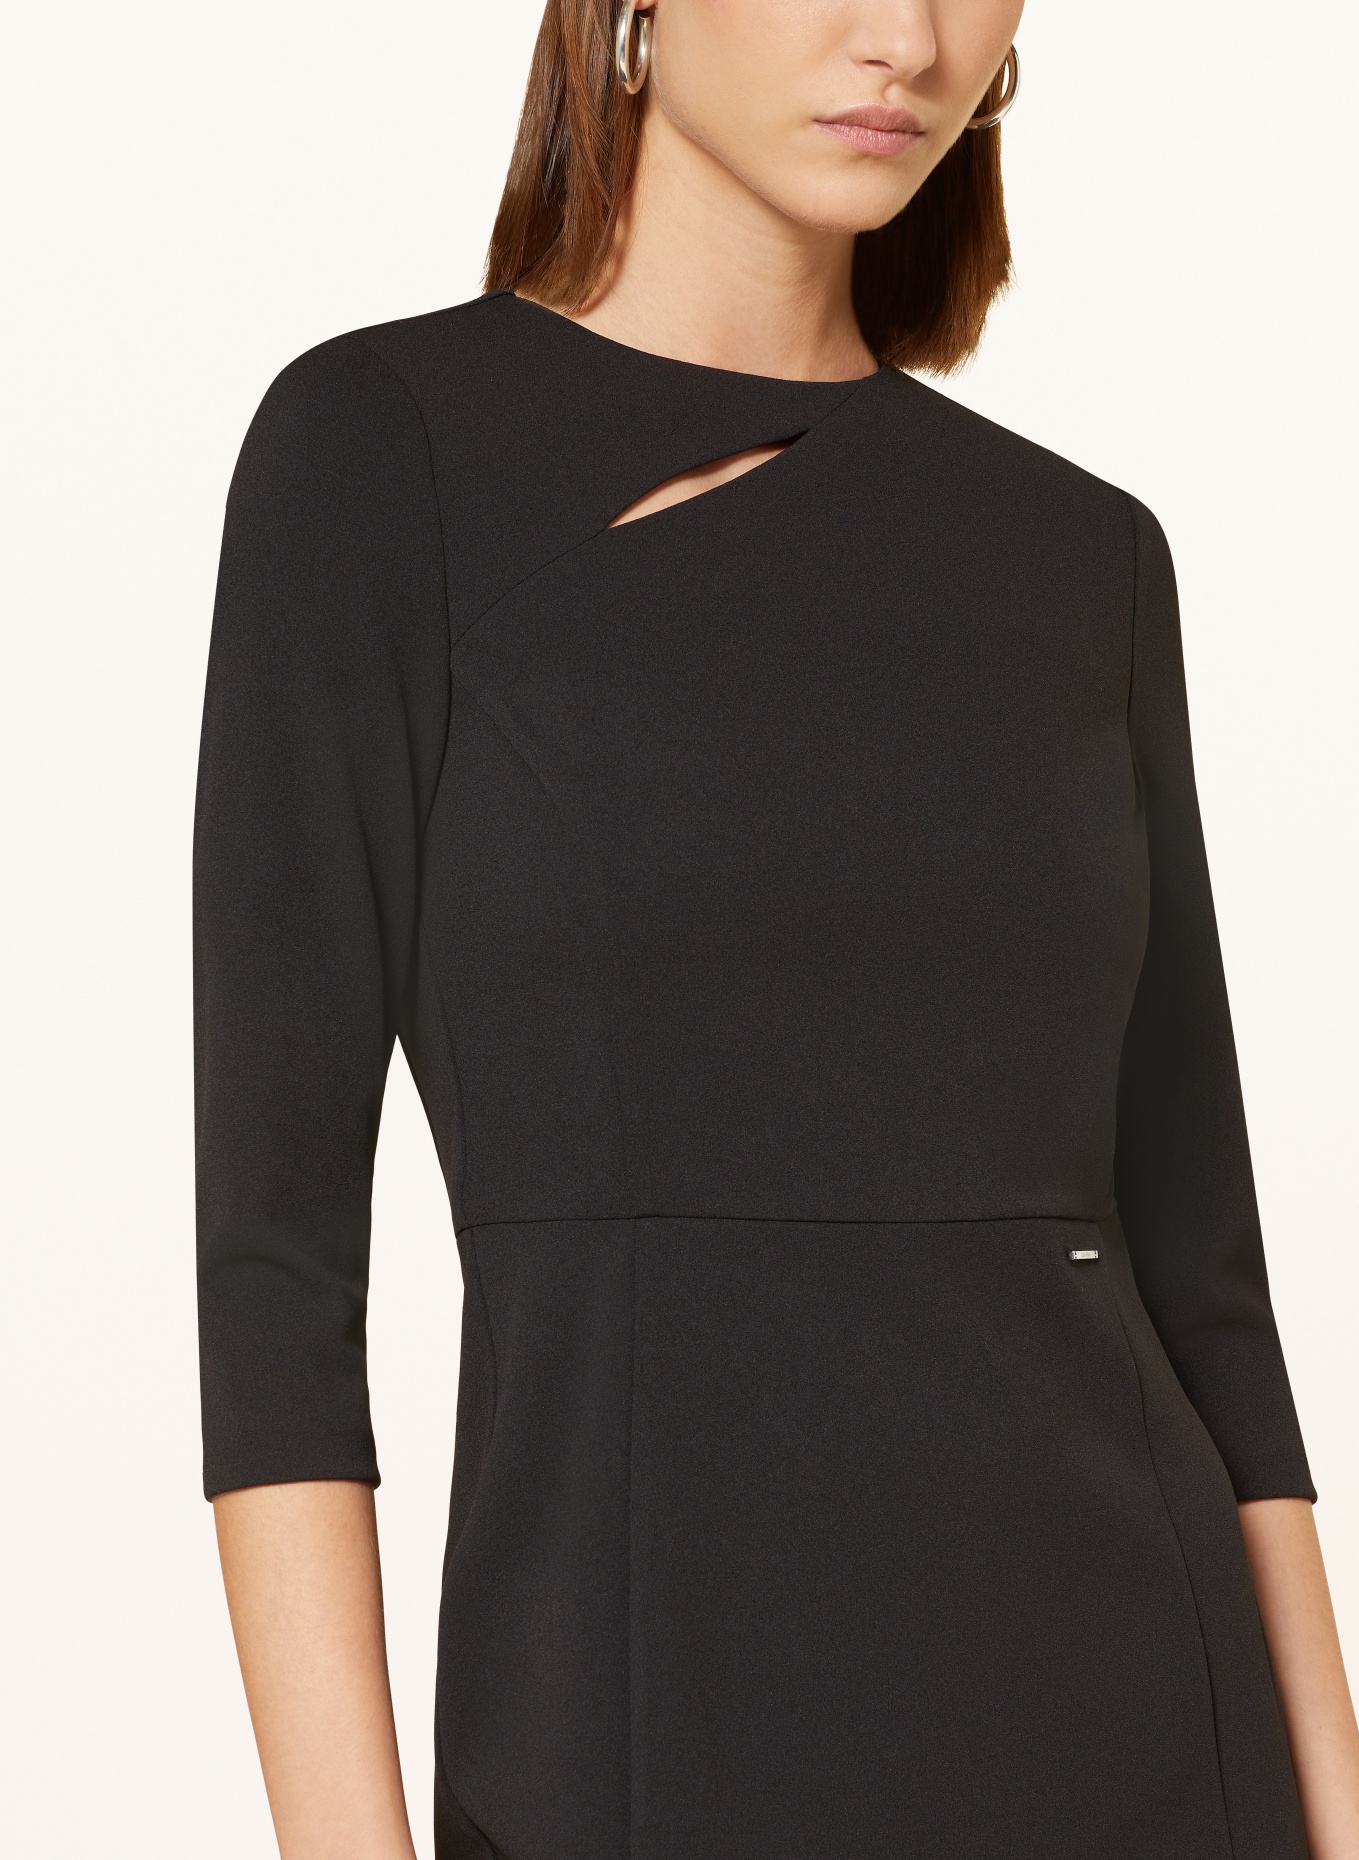 Calvin Klein Sheath dress with cut-out and 3/4 sleeves in black